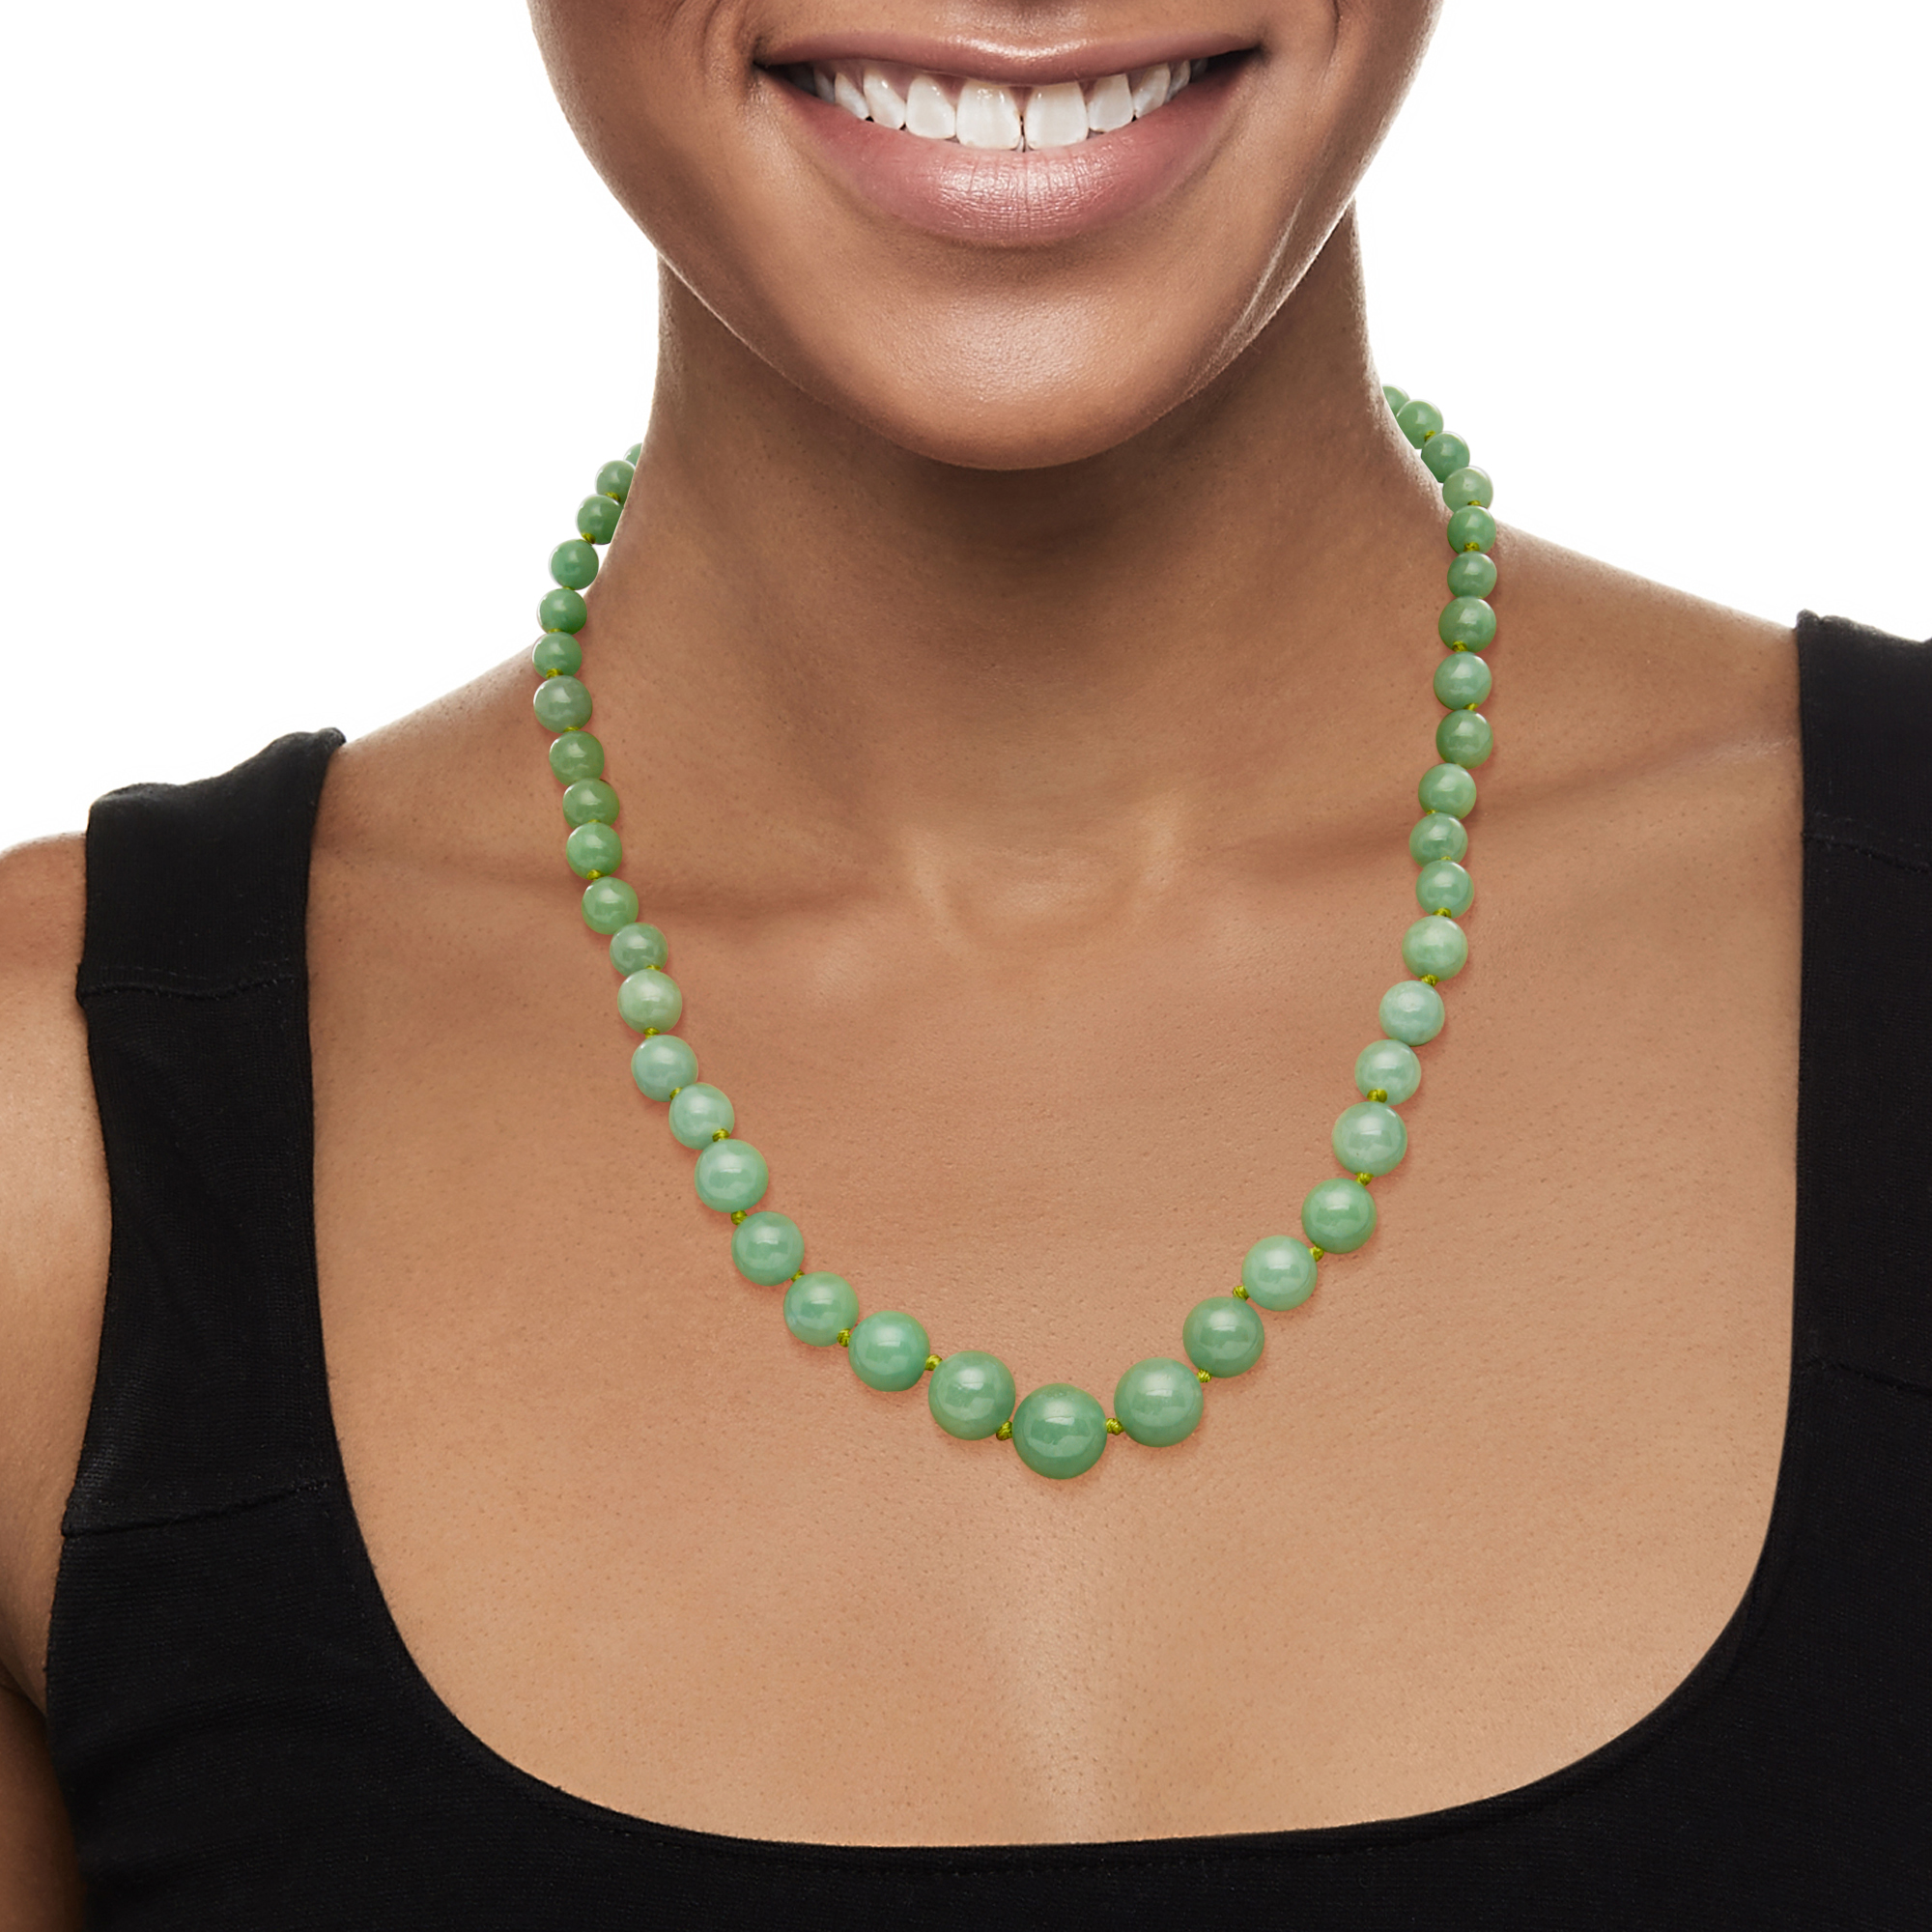 Ross-Simons 6-13mm Graduated Green Jade Bead Necklace With 14kt